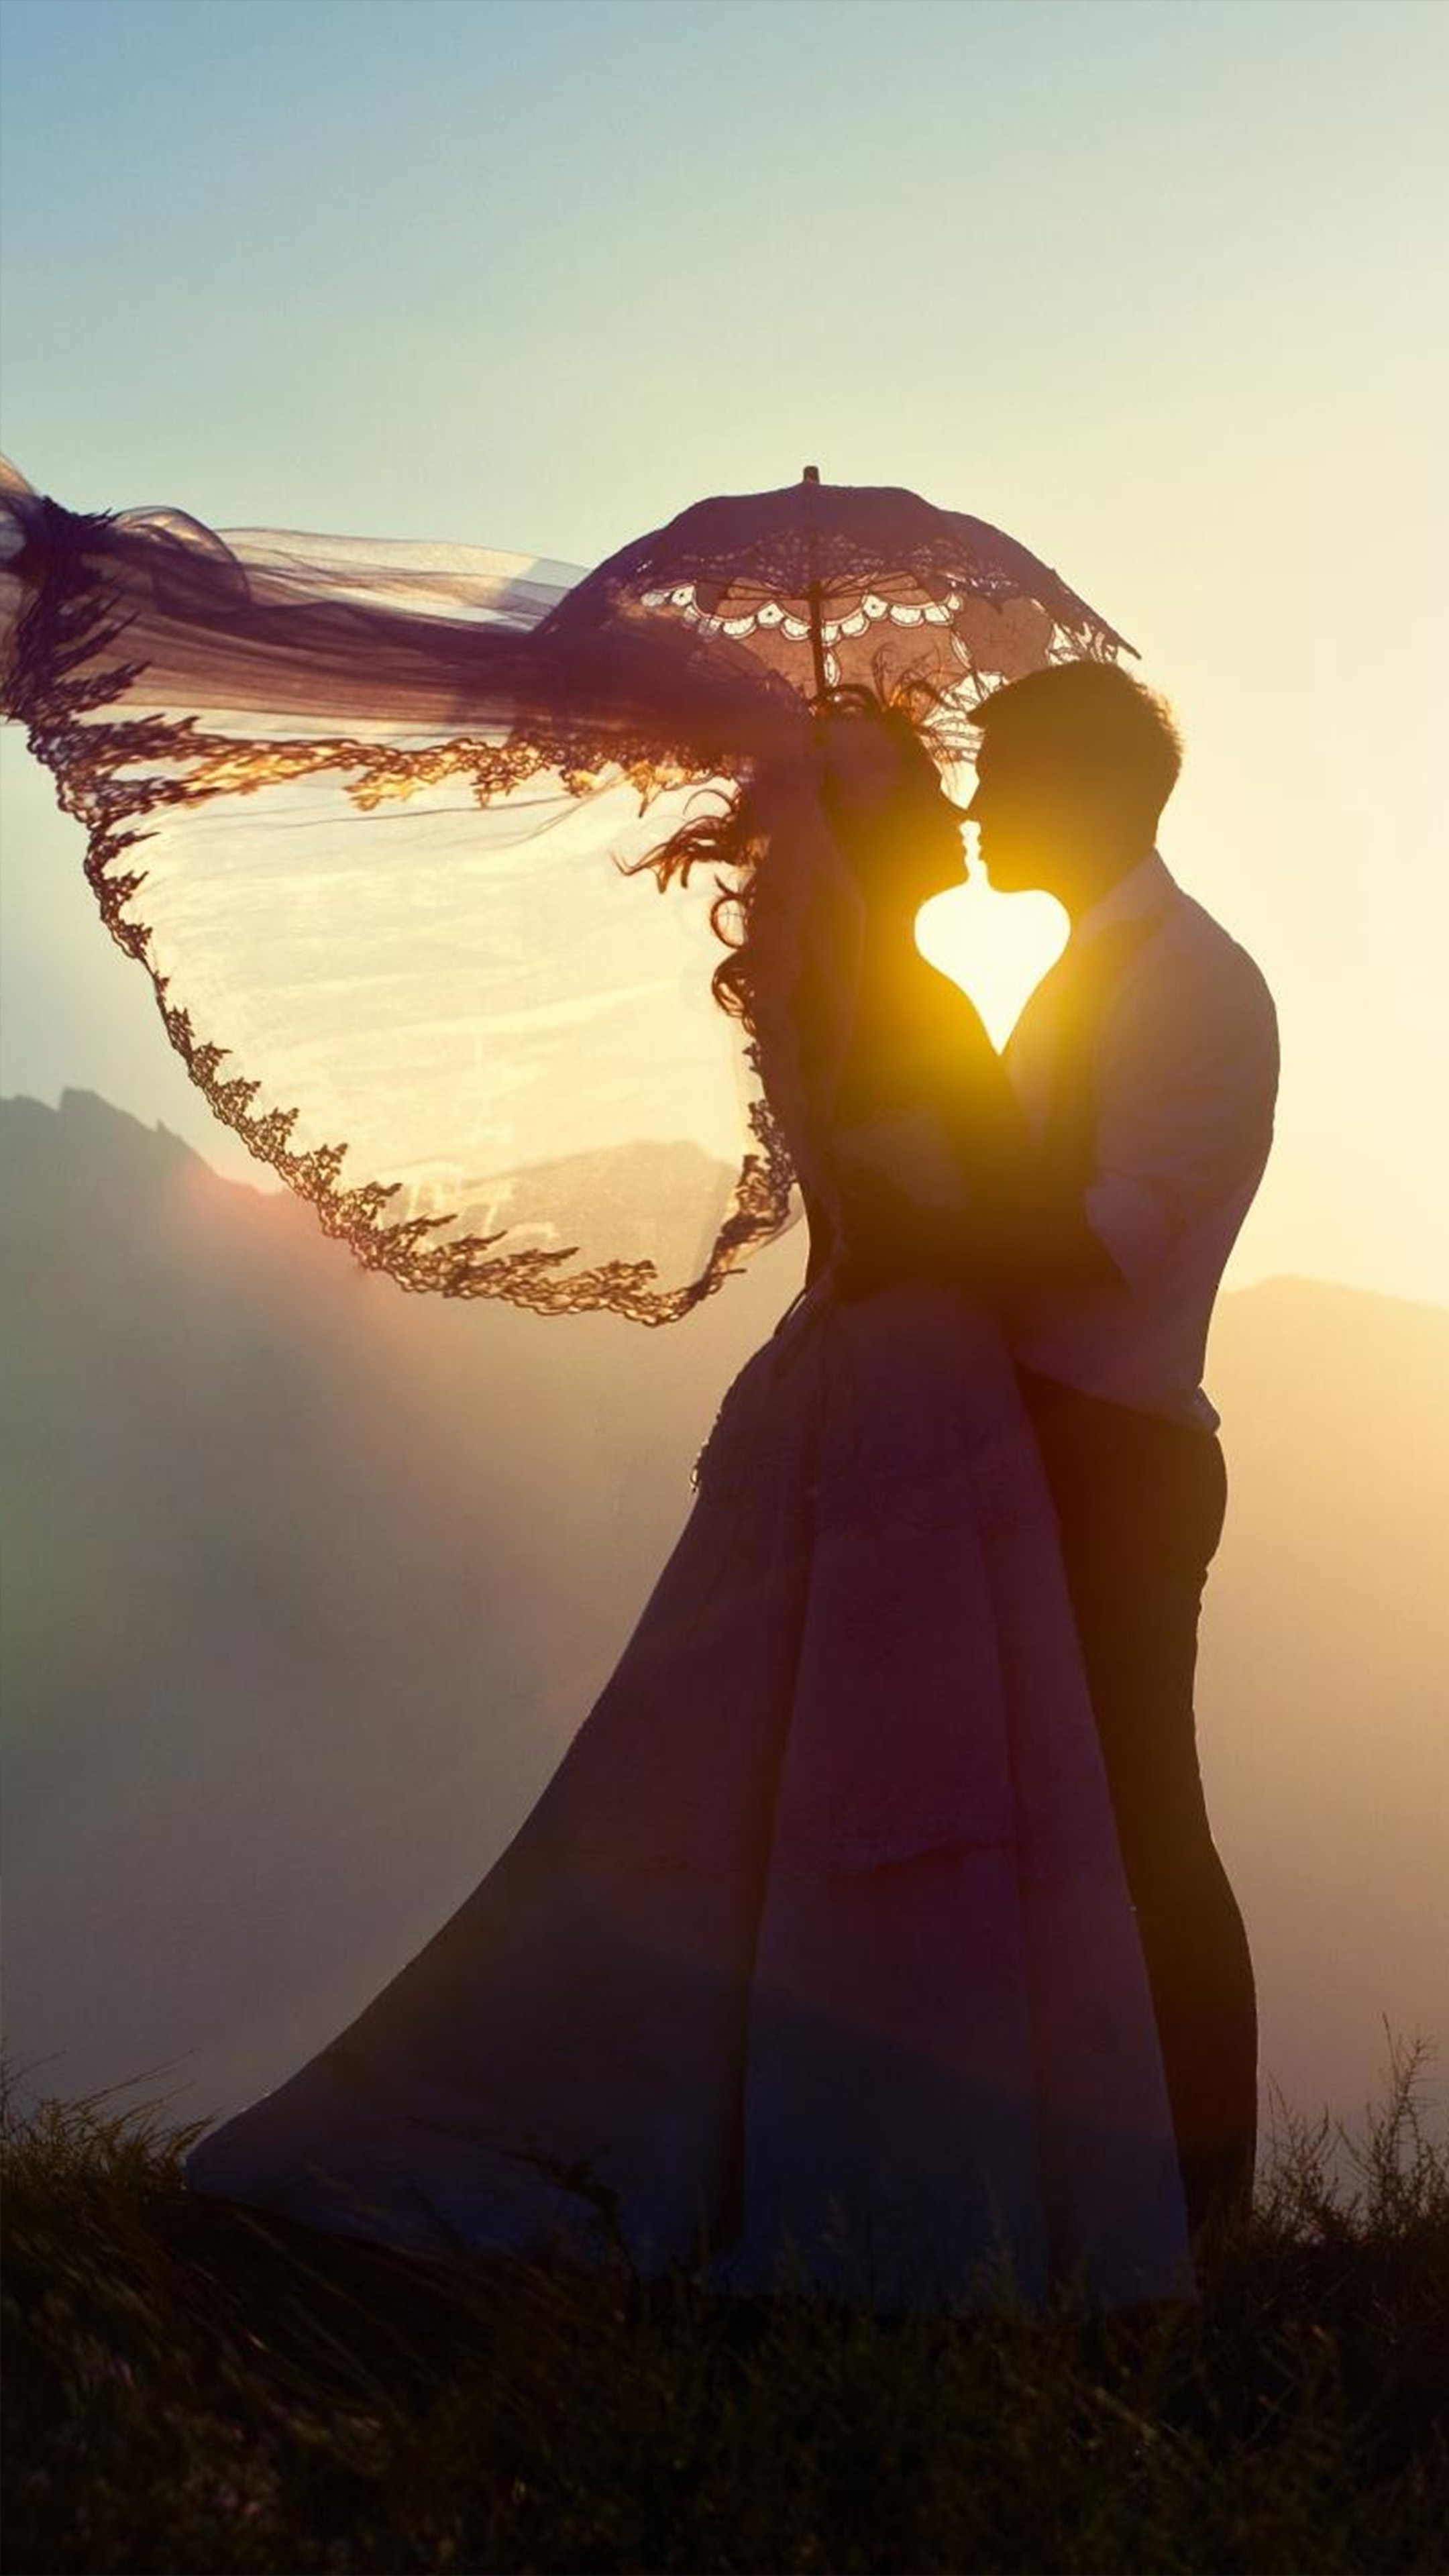 hd love couple wallpapers for mobile,love,romance,sky,happy,dress